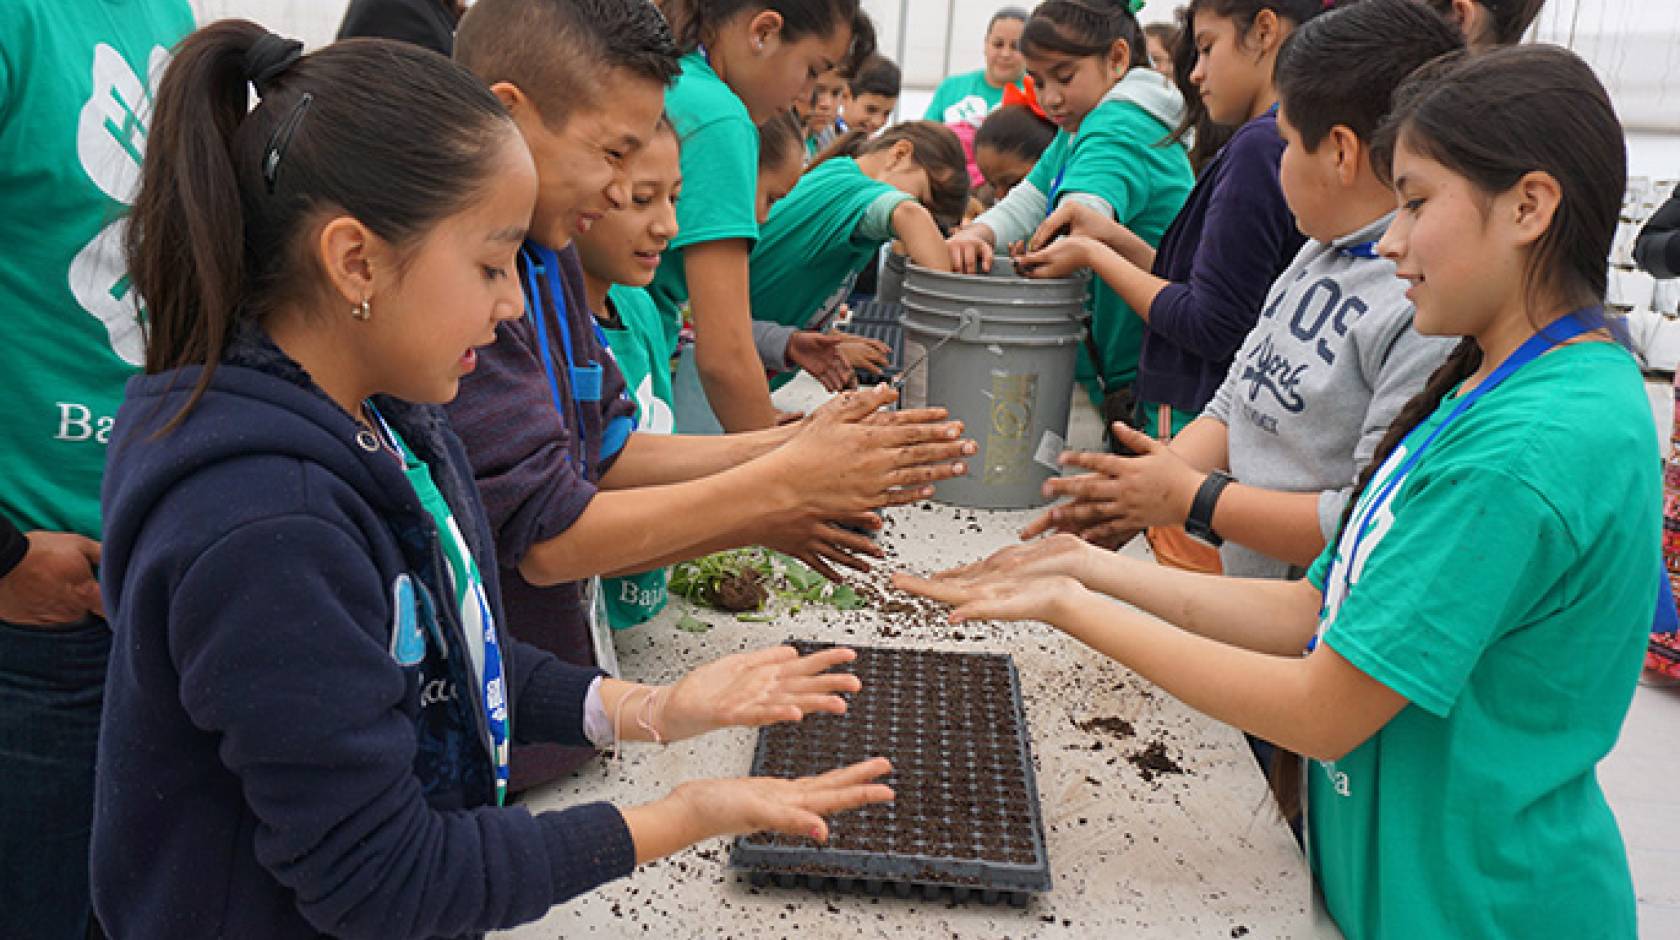 Children in Mexicali, Mexico, plant seeds while learning about food and agriculture.